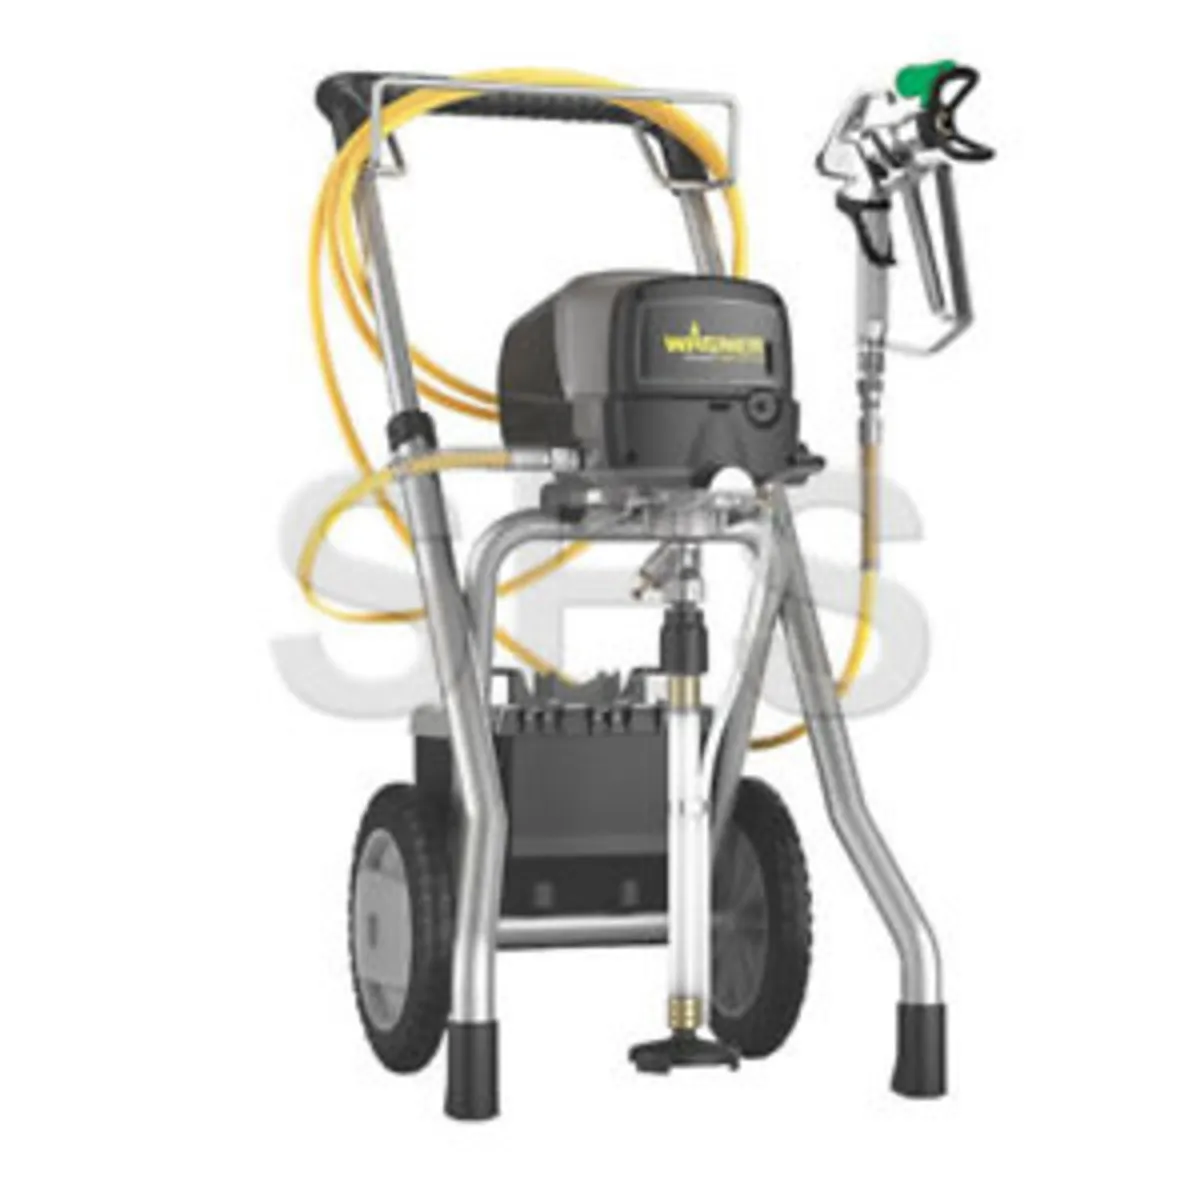 Wagner HEA PP90 Extra Paint Sprayer -Trolley - Image 1